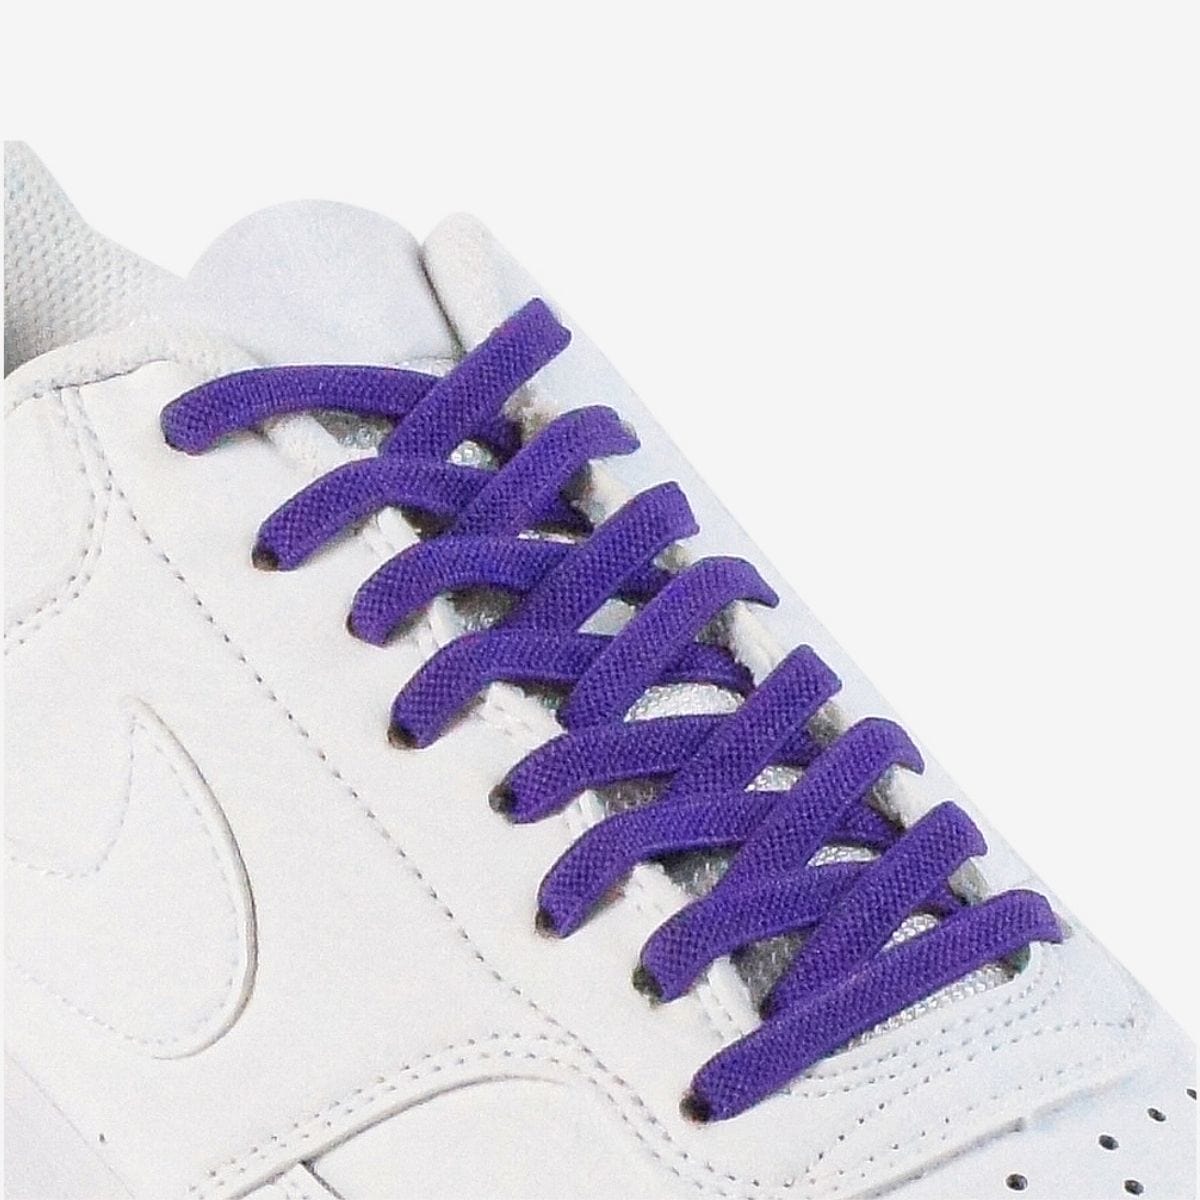 kids-no-tie-shoelaces-with-purple-laces-on-nike-white-sneakers-by-kicks-shoelaces